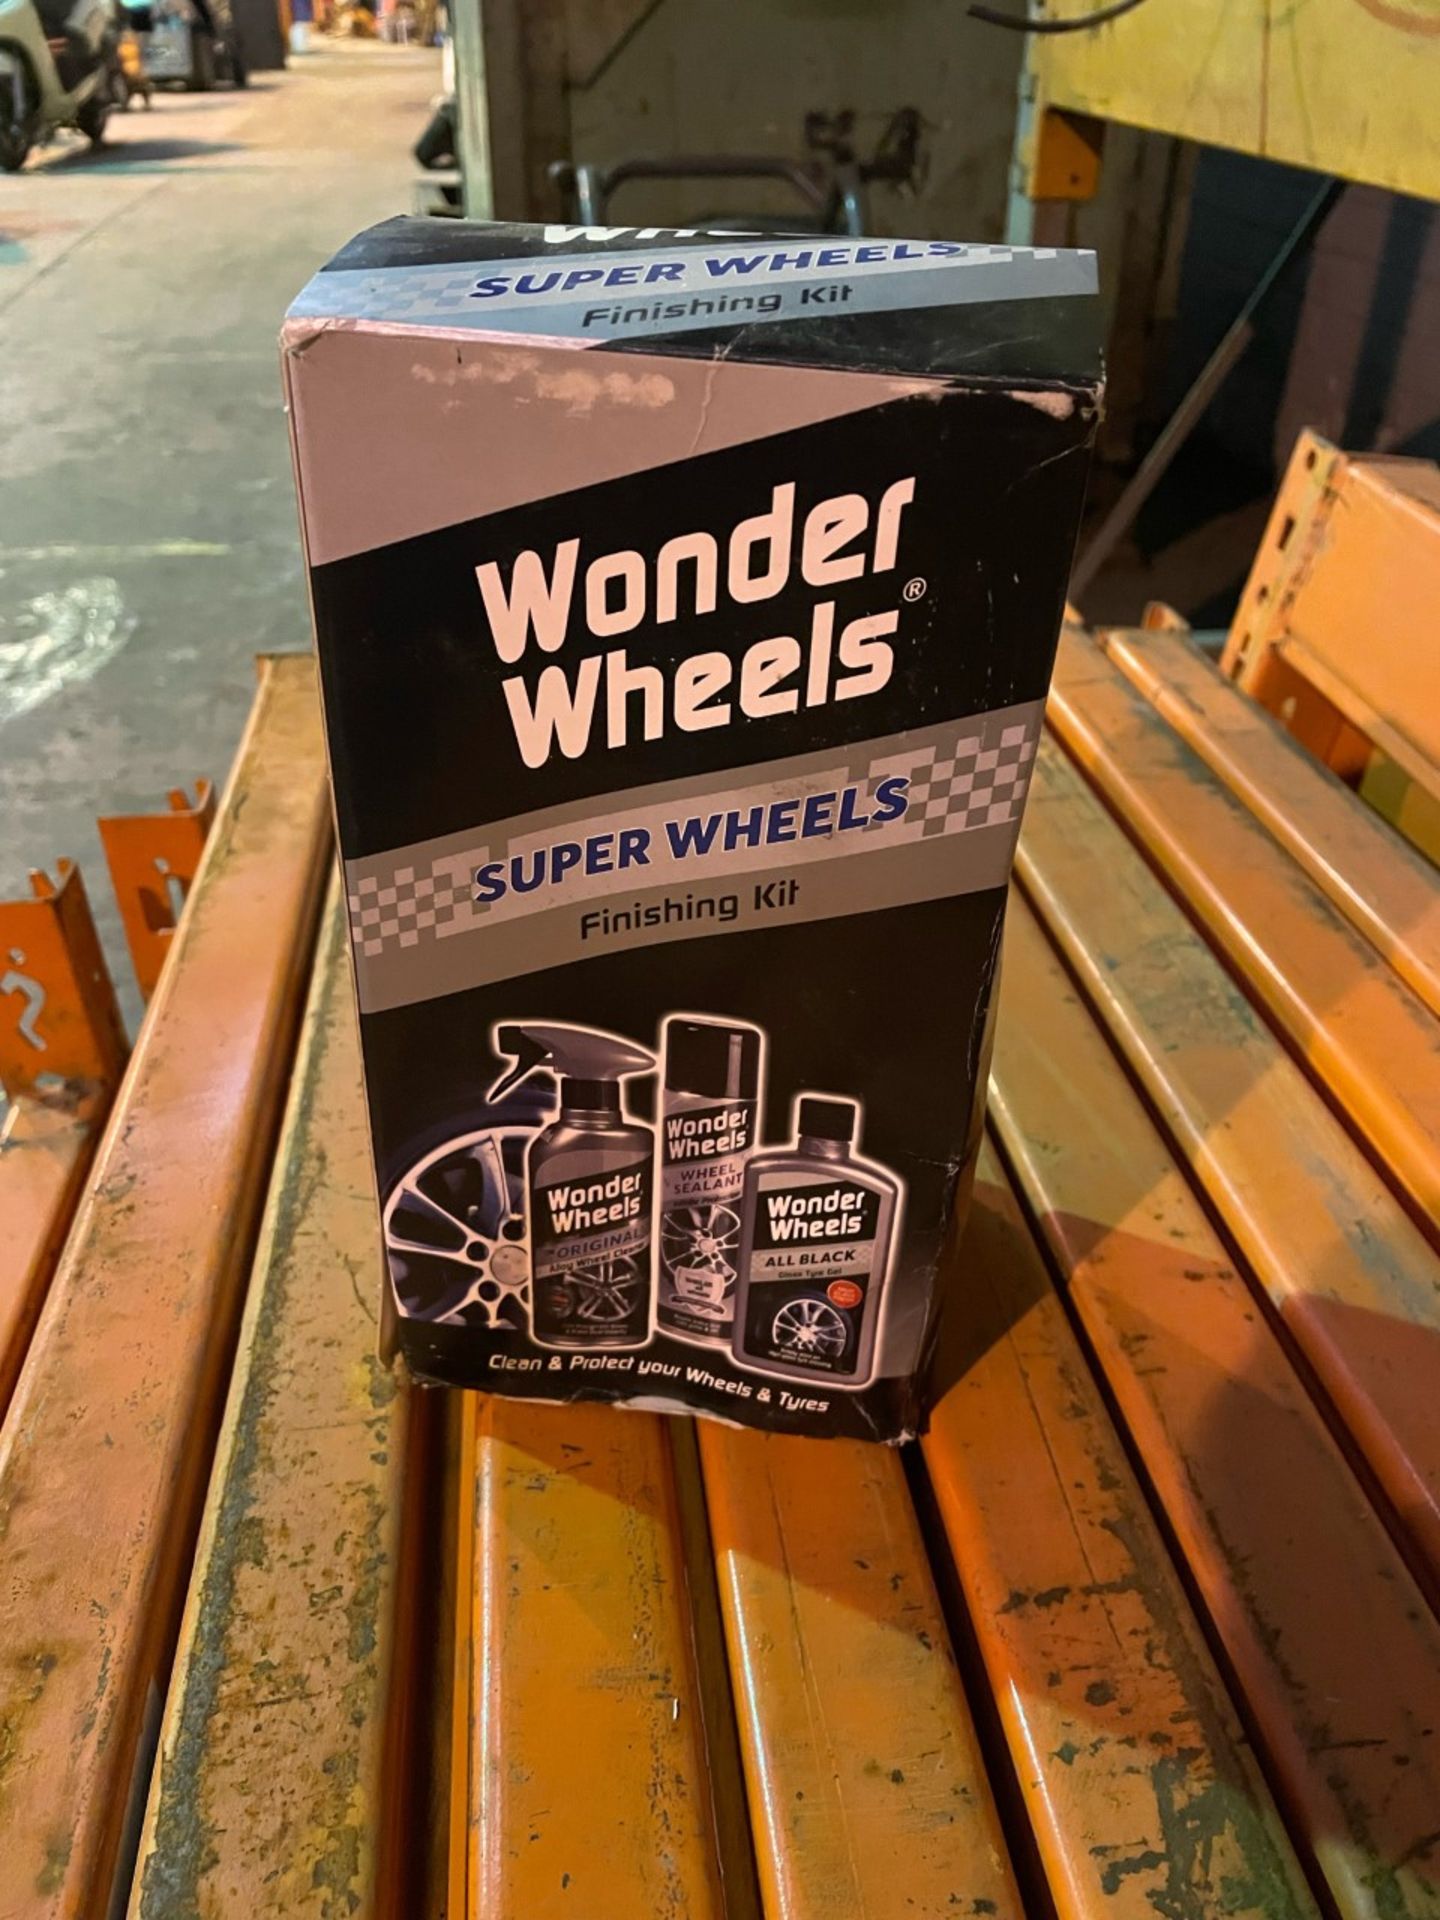 Wonder wheels finishing kit box contains alloy wheel cleaner, wheel sealant and gloss tyre shine.